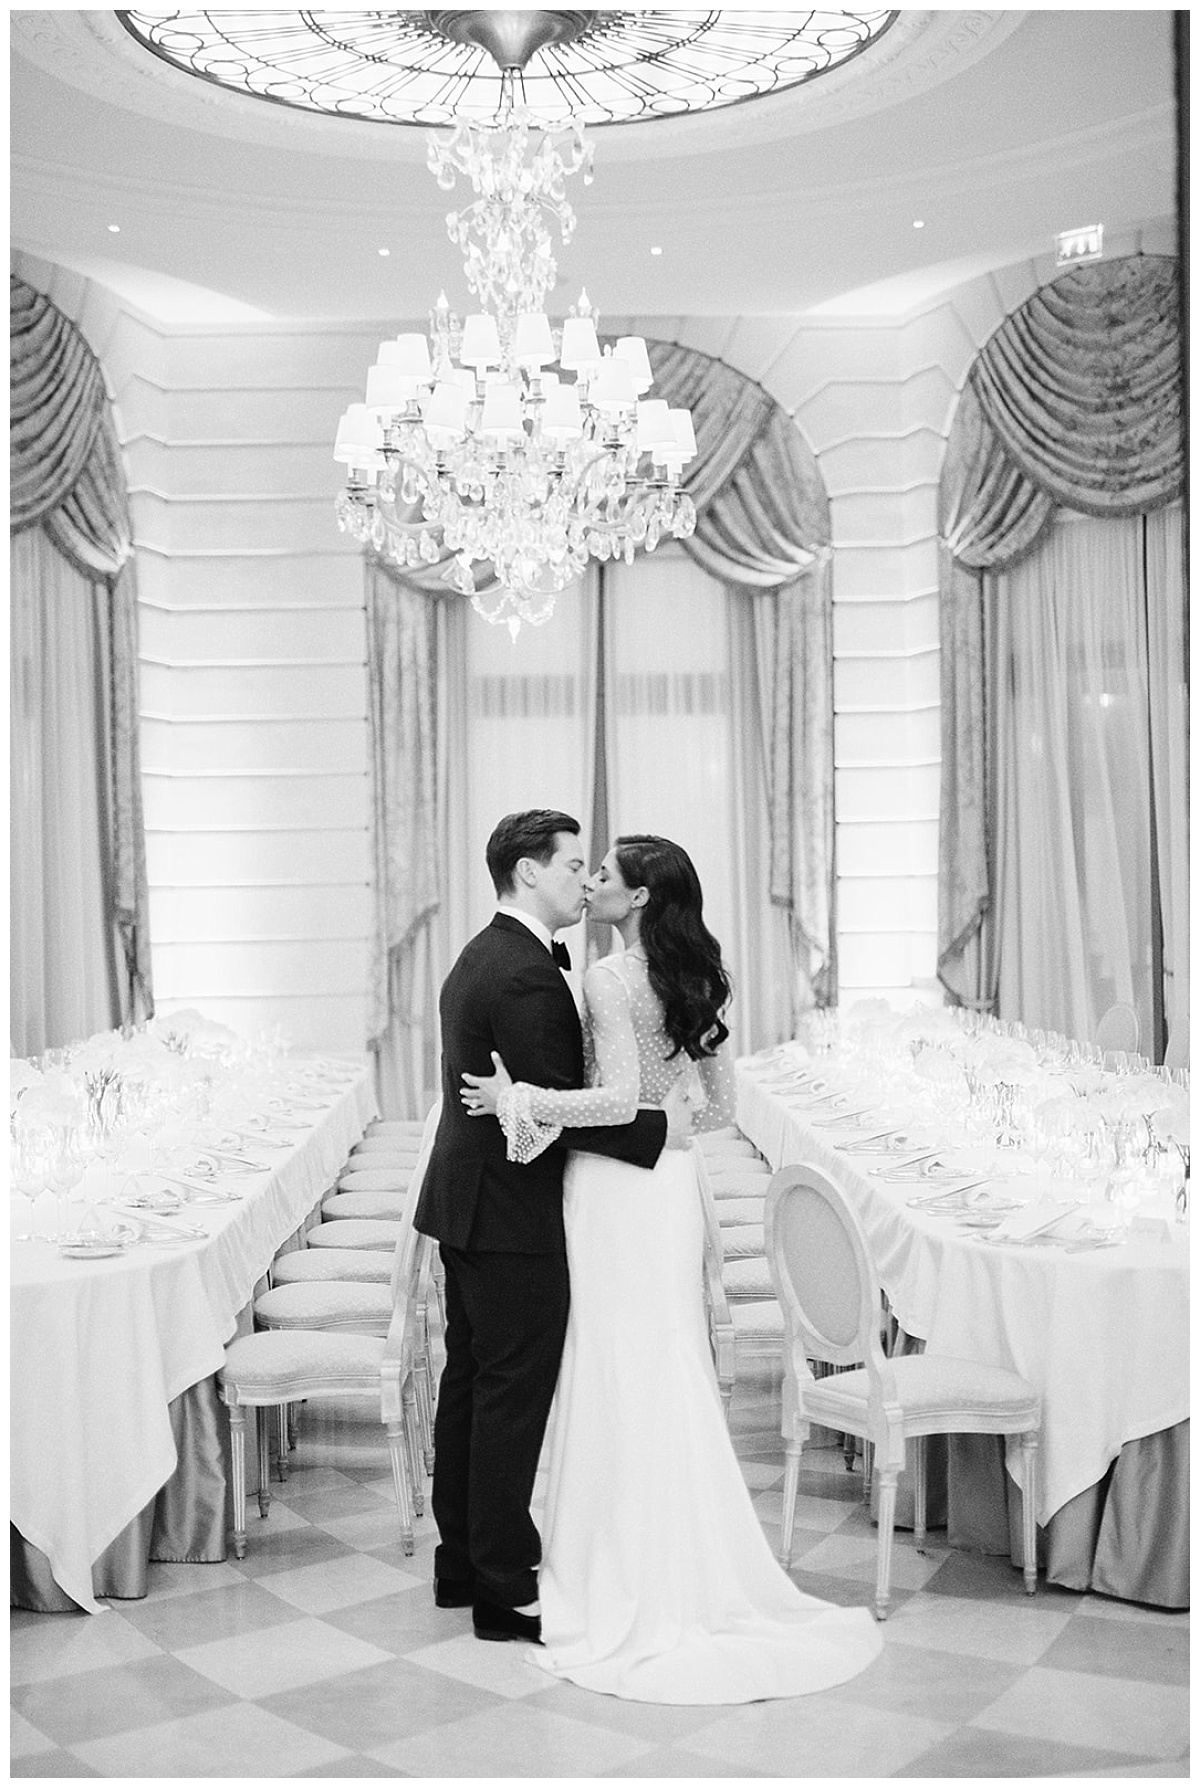 A wonderful couple kissing in an historic salon of the ritz for their wedding 